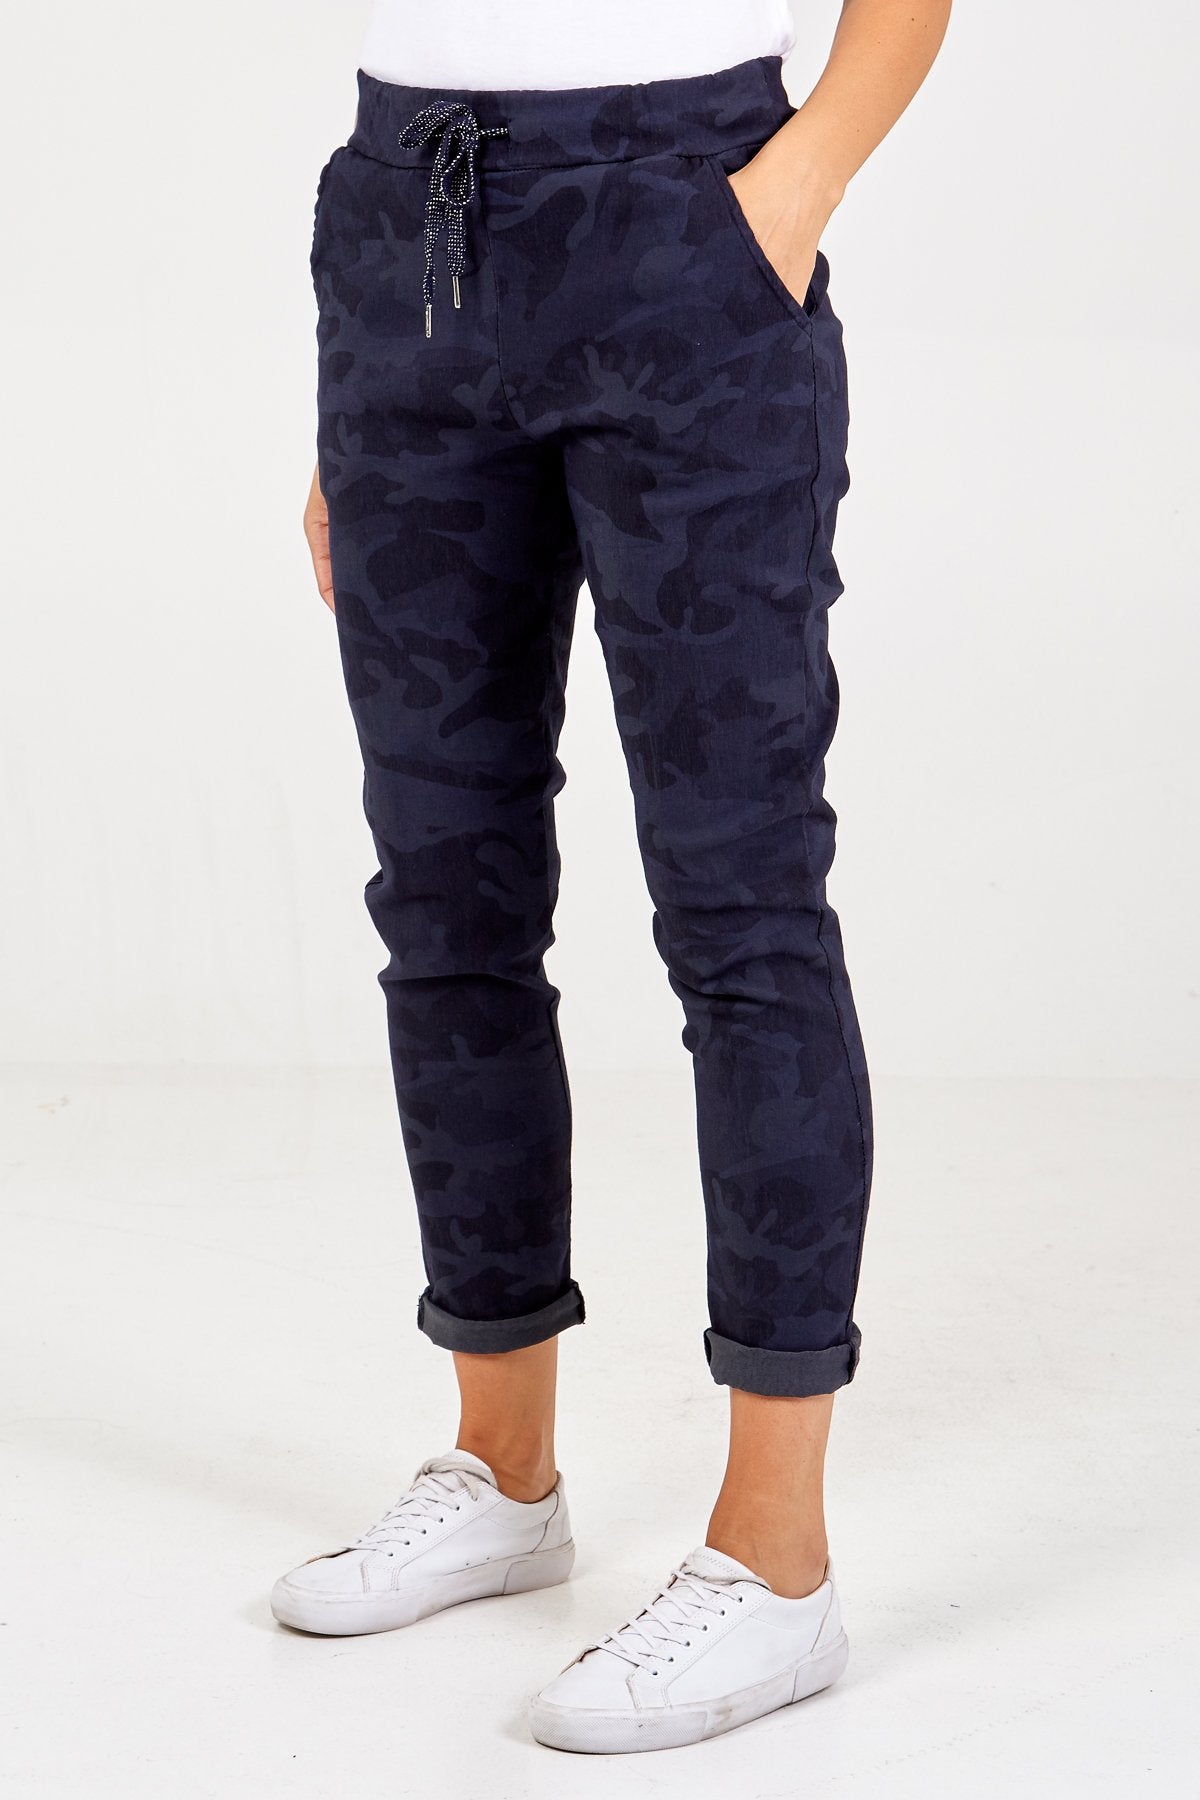 Gill Plus Sized Magic Camouflage Trousers - Navy - Liven Boutique